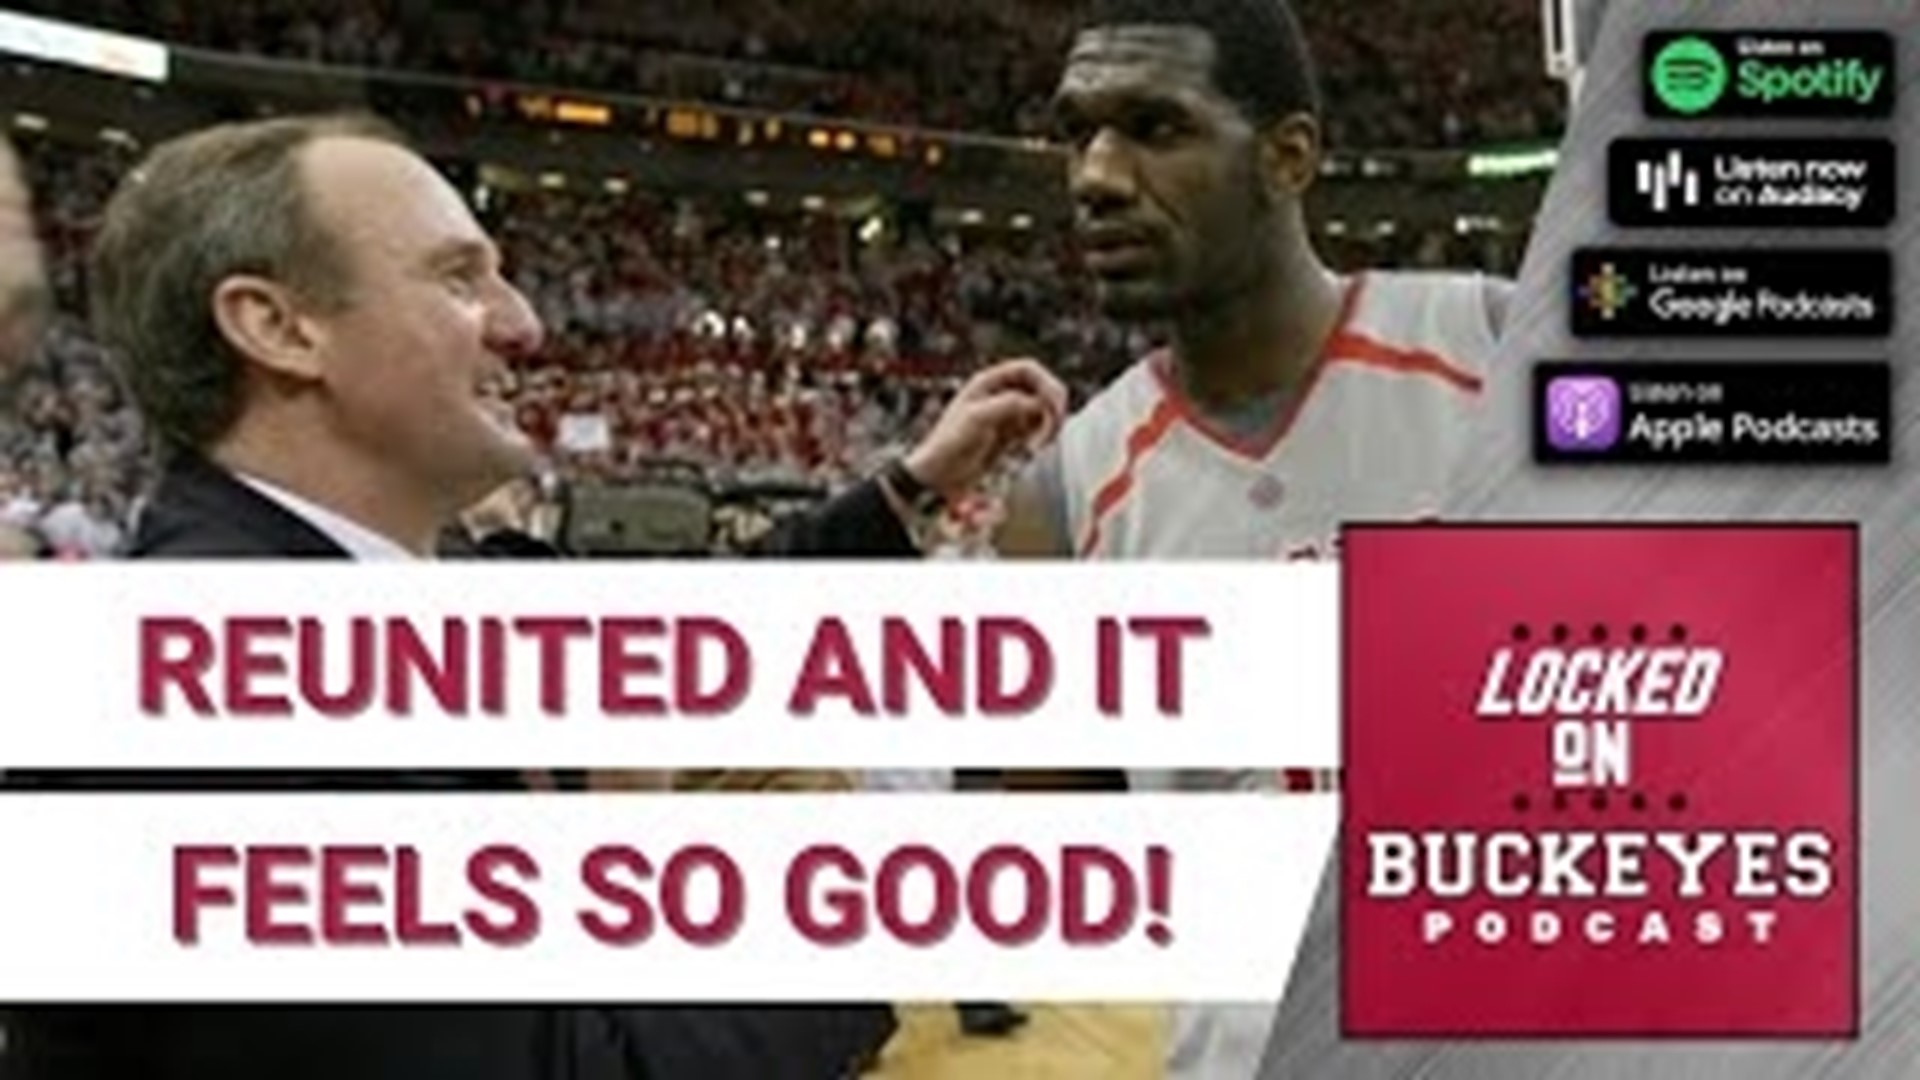 Greg Oden and Jon Diebler told Thad Matta they'd join their former coach at Butler. That and more on Locked On Buckeyes.